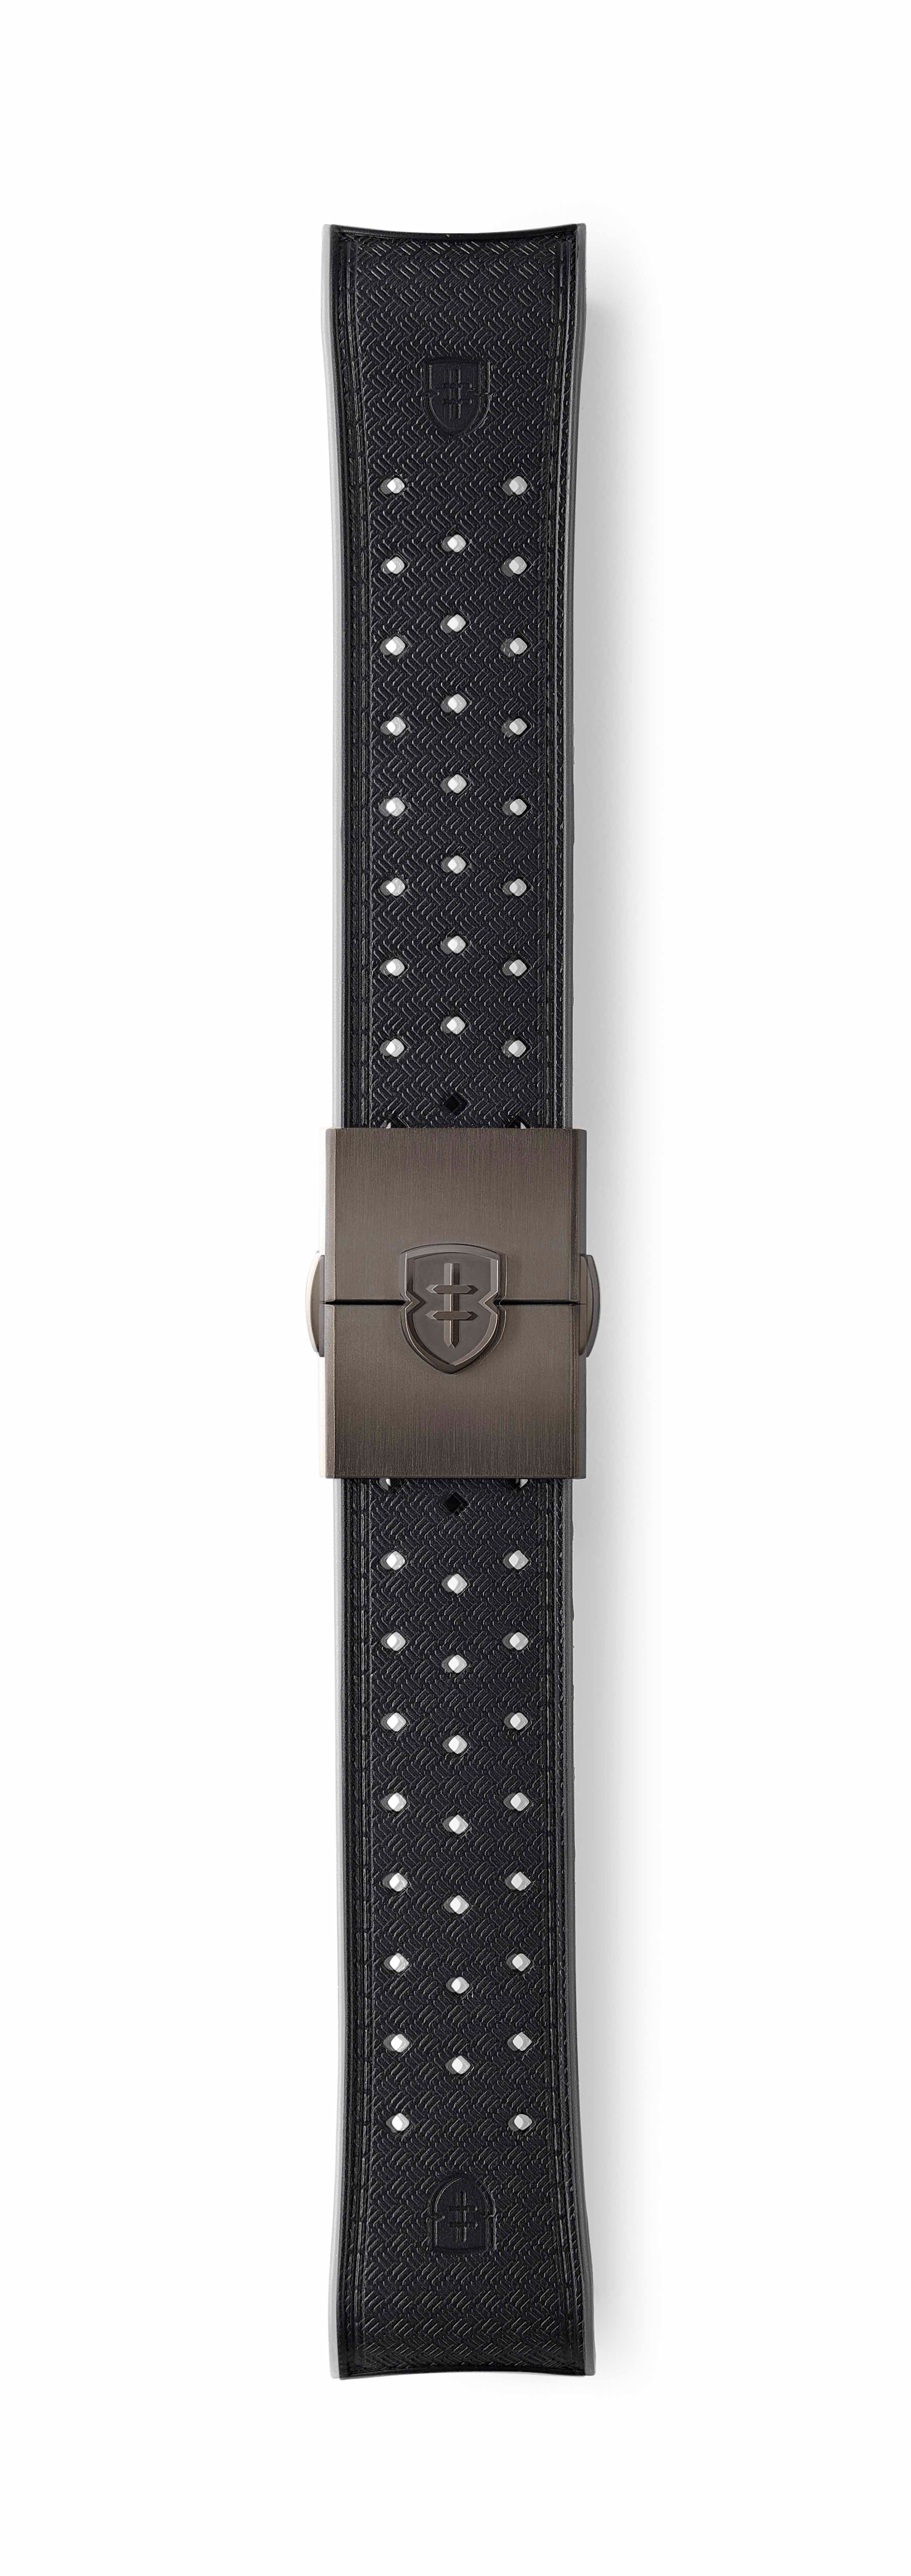 STR-R51: Black Textured Rubber Strap with Deployant Buckle